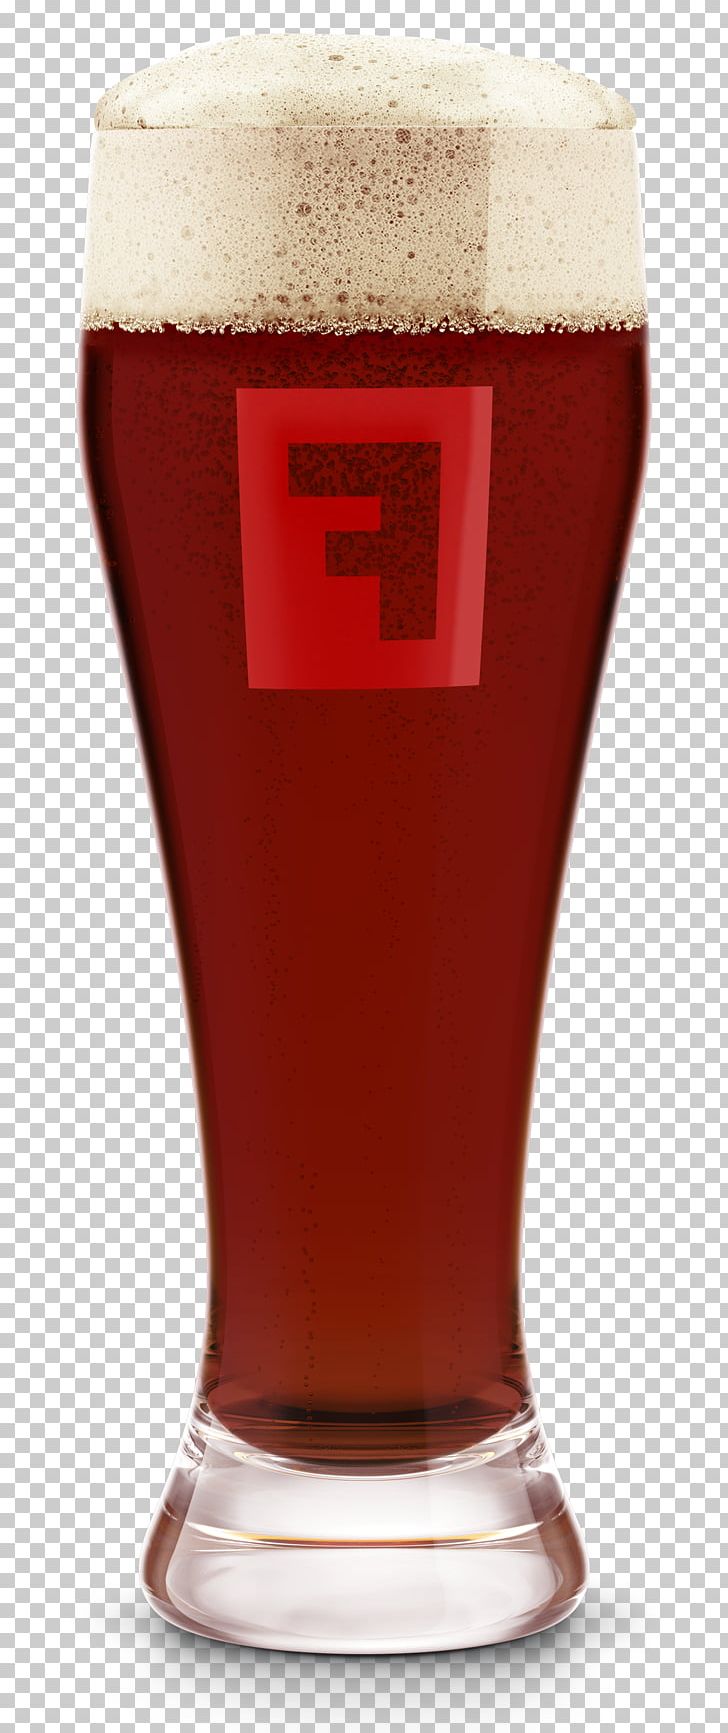 Beer Fullsteam Brewery Pint Glass Vienna Lager PNG, Clipart, Beer, Beer Glass, Brewery, Chestnut, Drink Free PNG Download